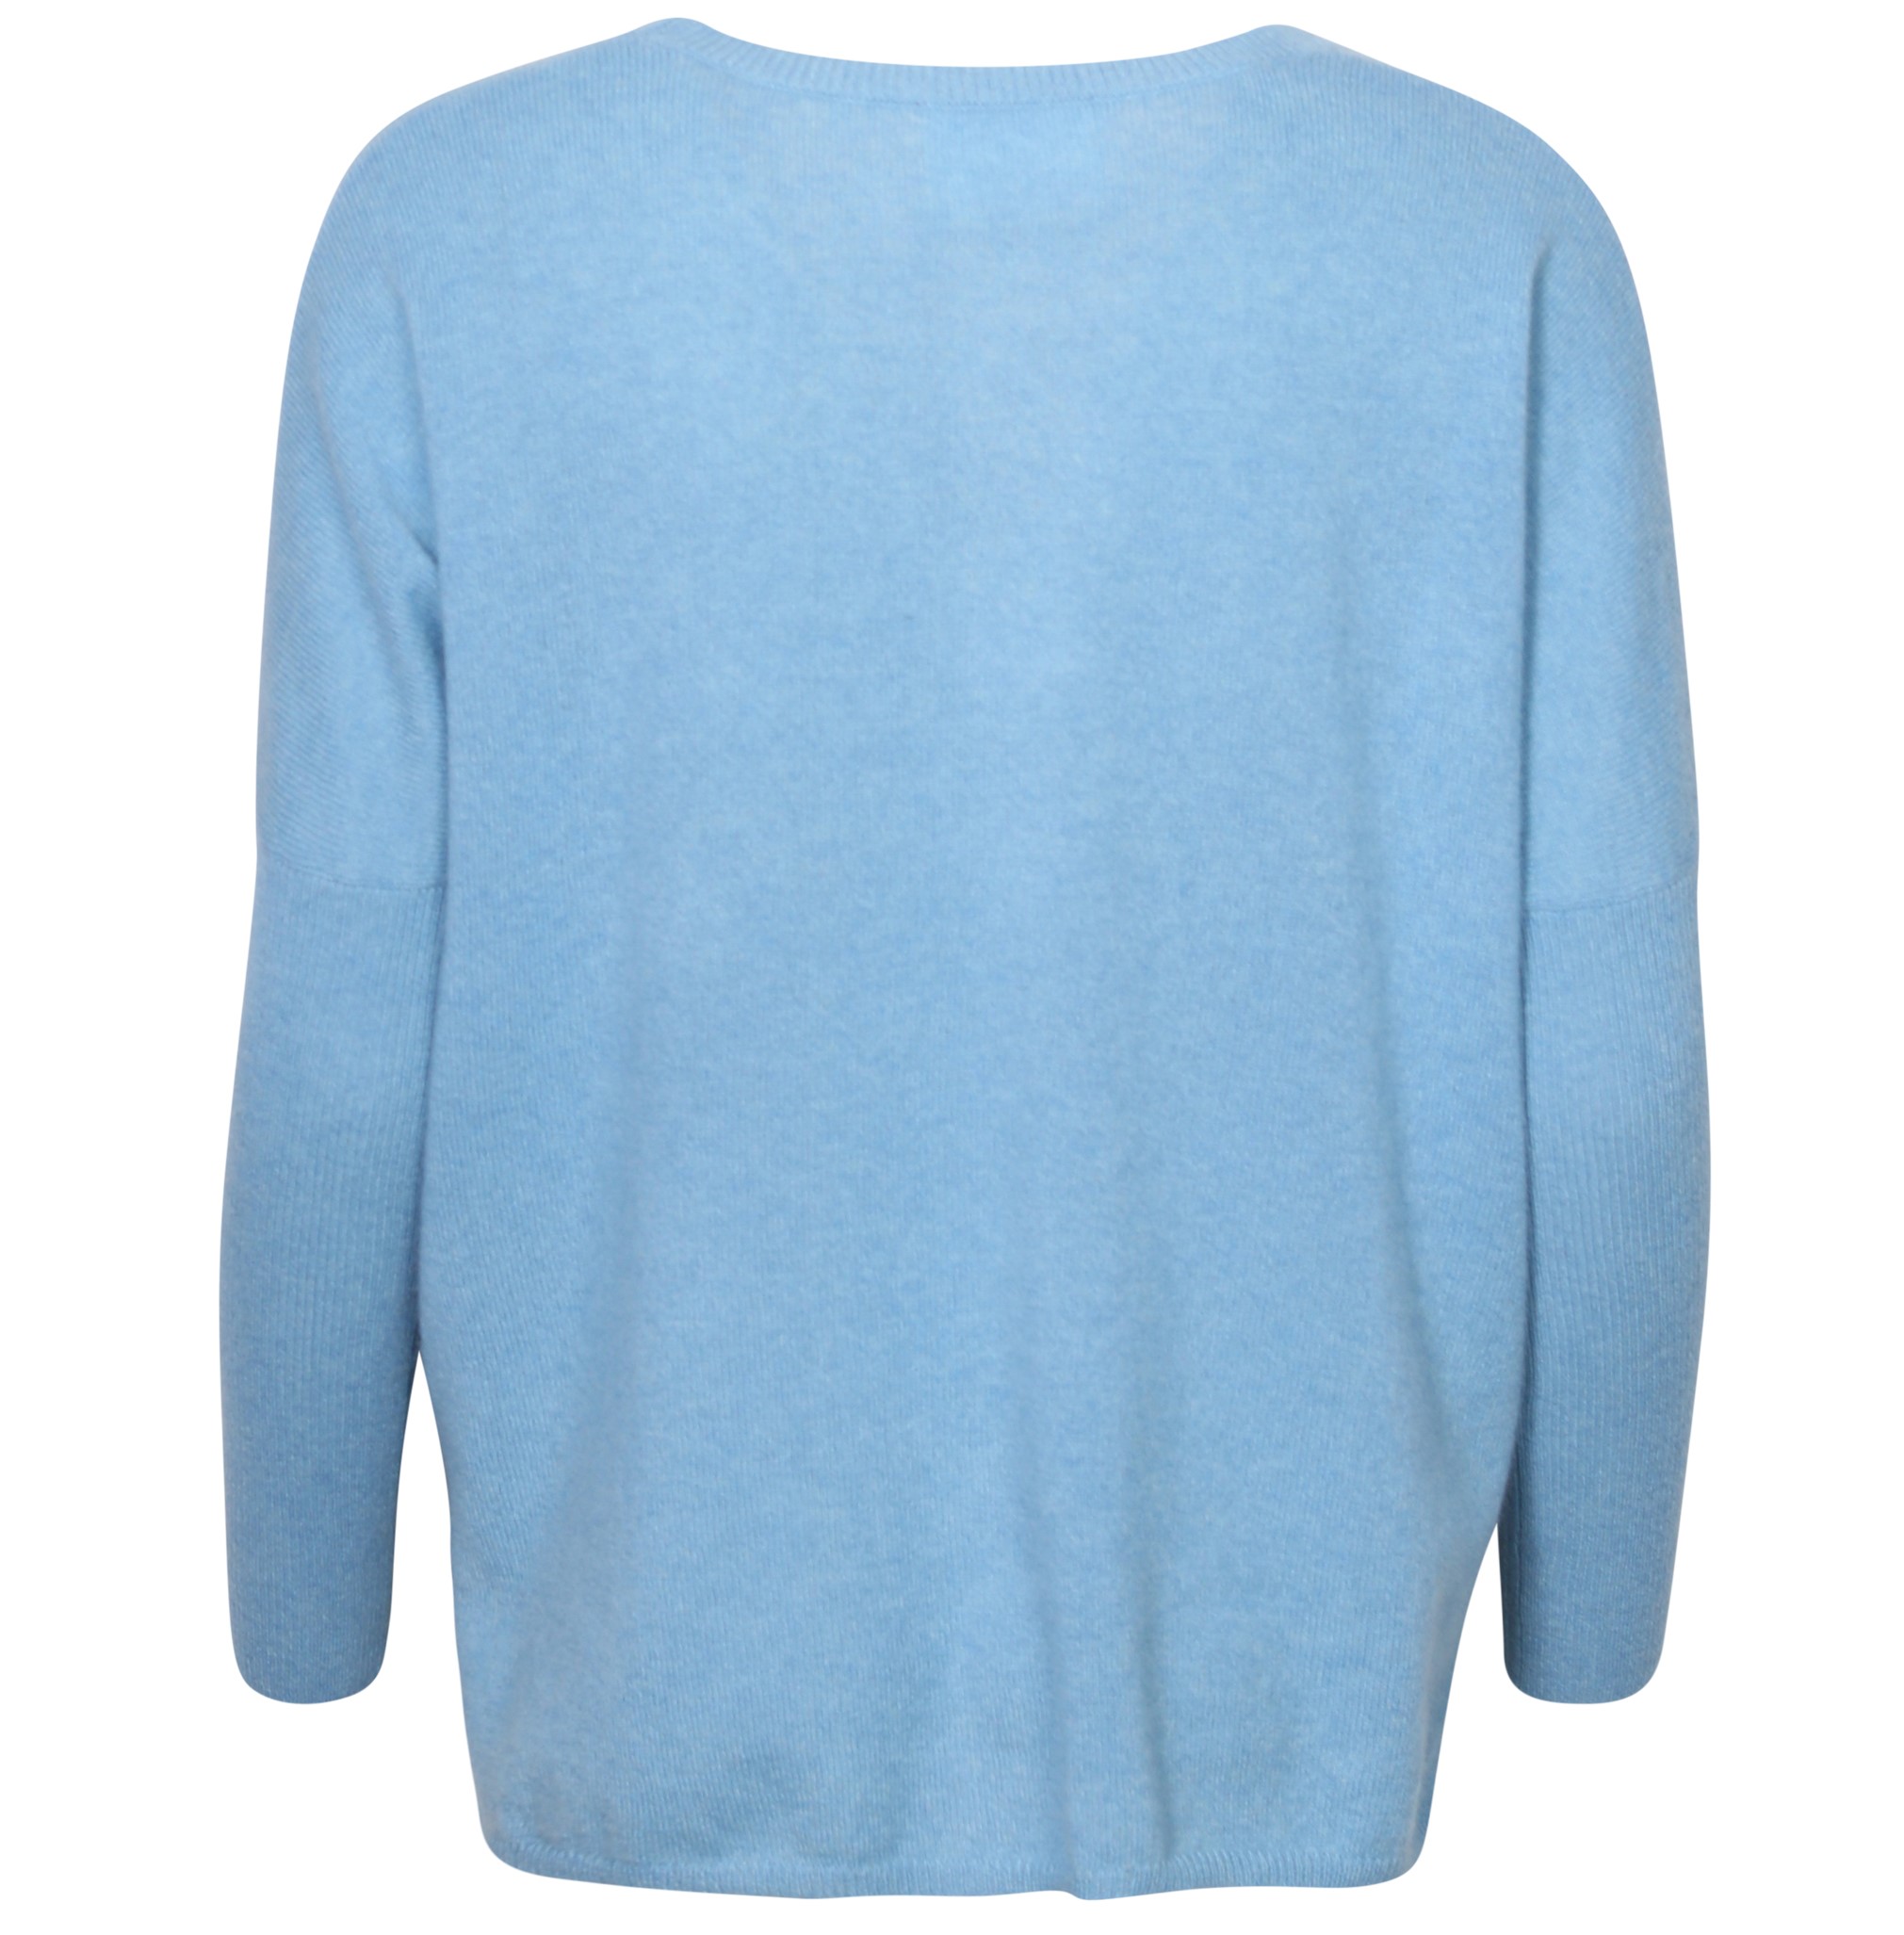 ABSOLUT CASHMERE Poncho Sweater Astrid in Blue S